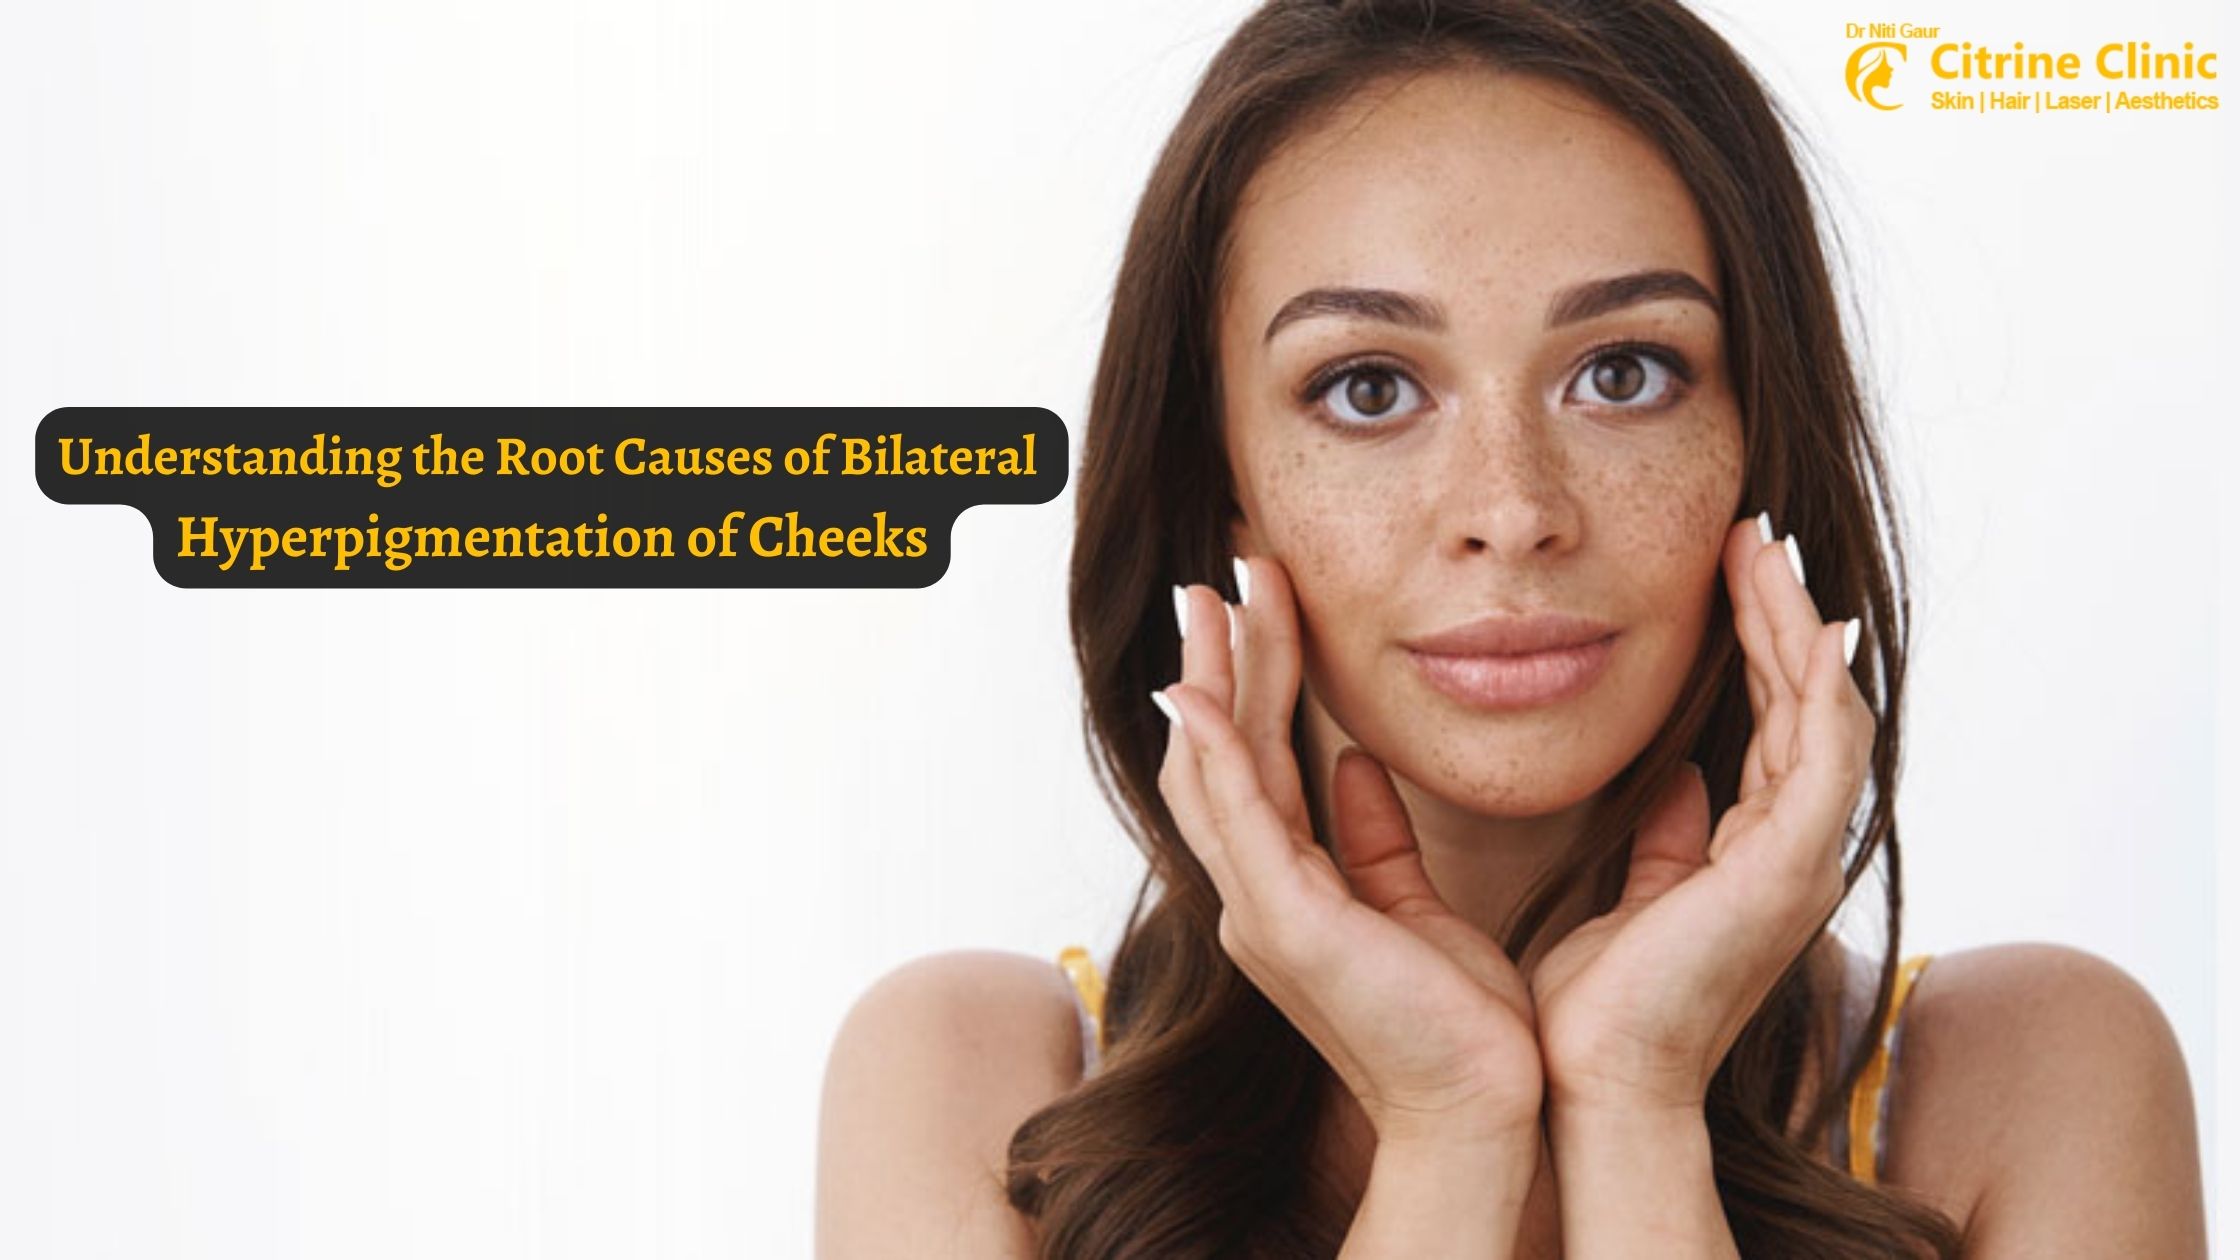 Understanding the Root Causes of Bilateral Hyperpigmentation of Cheeks